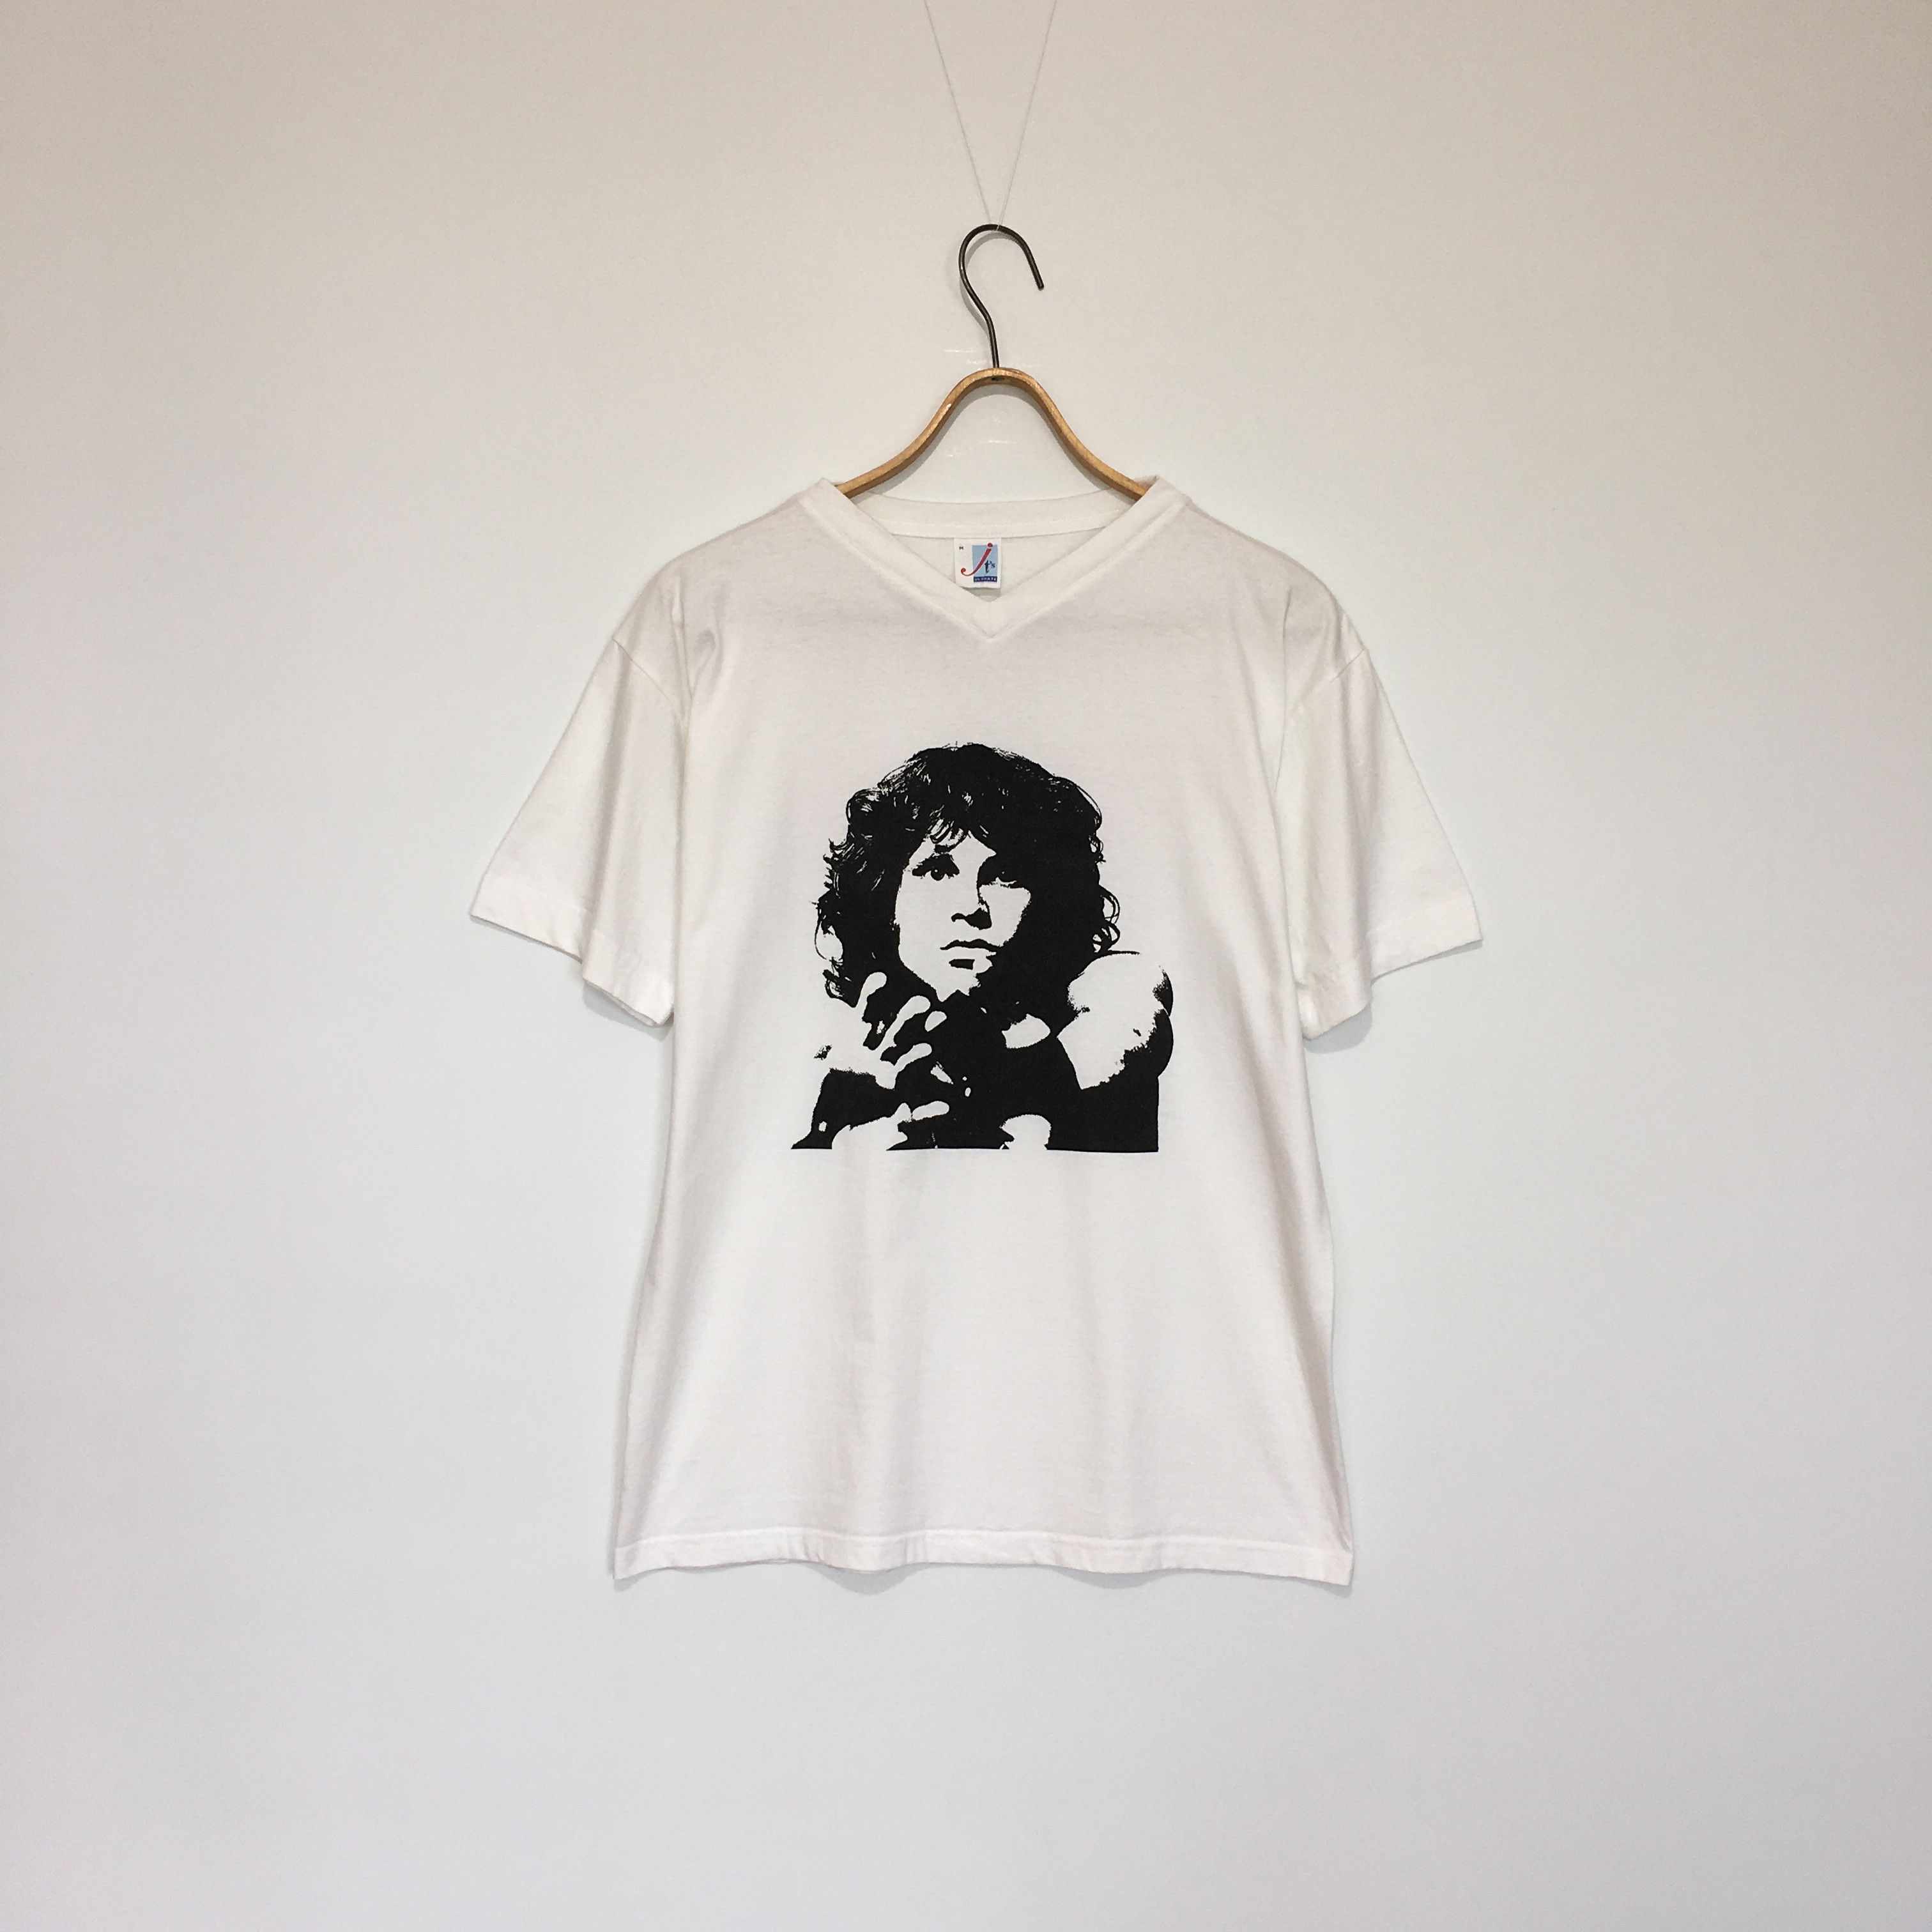 Pre-owned Band Tees X Rock Tees Vintage 2001 The Doors Jim Morrison T-shirt Size M In White